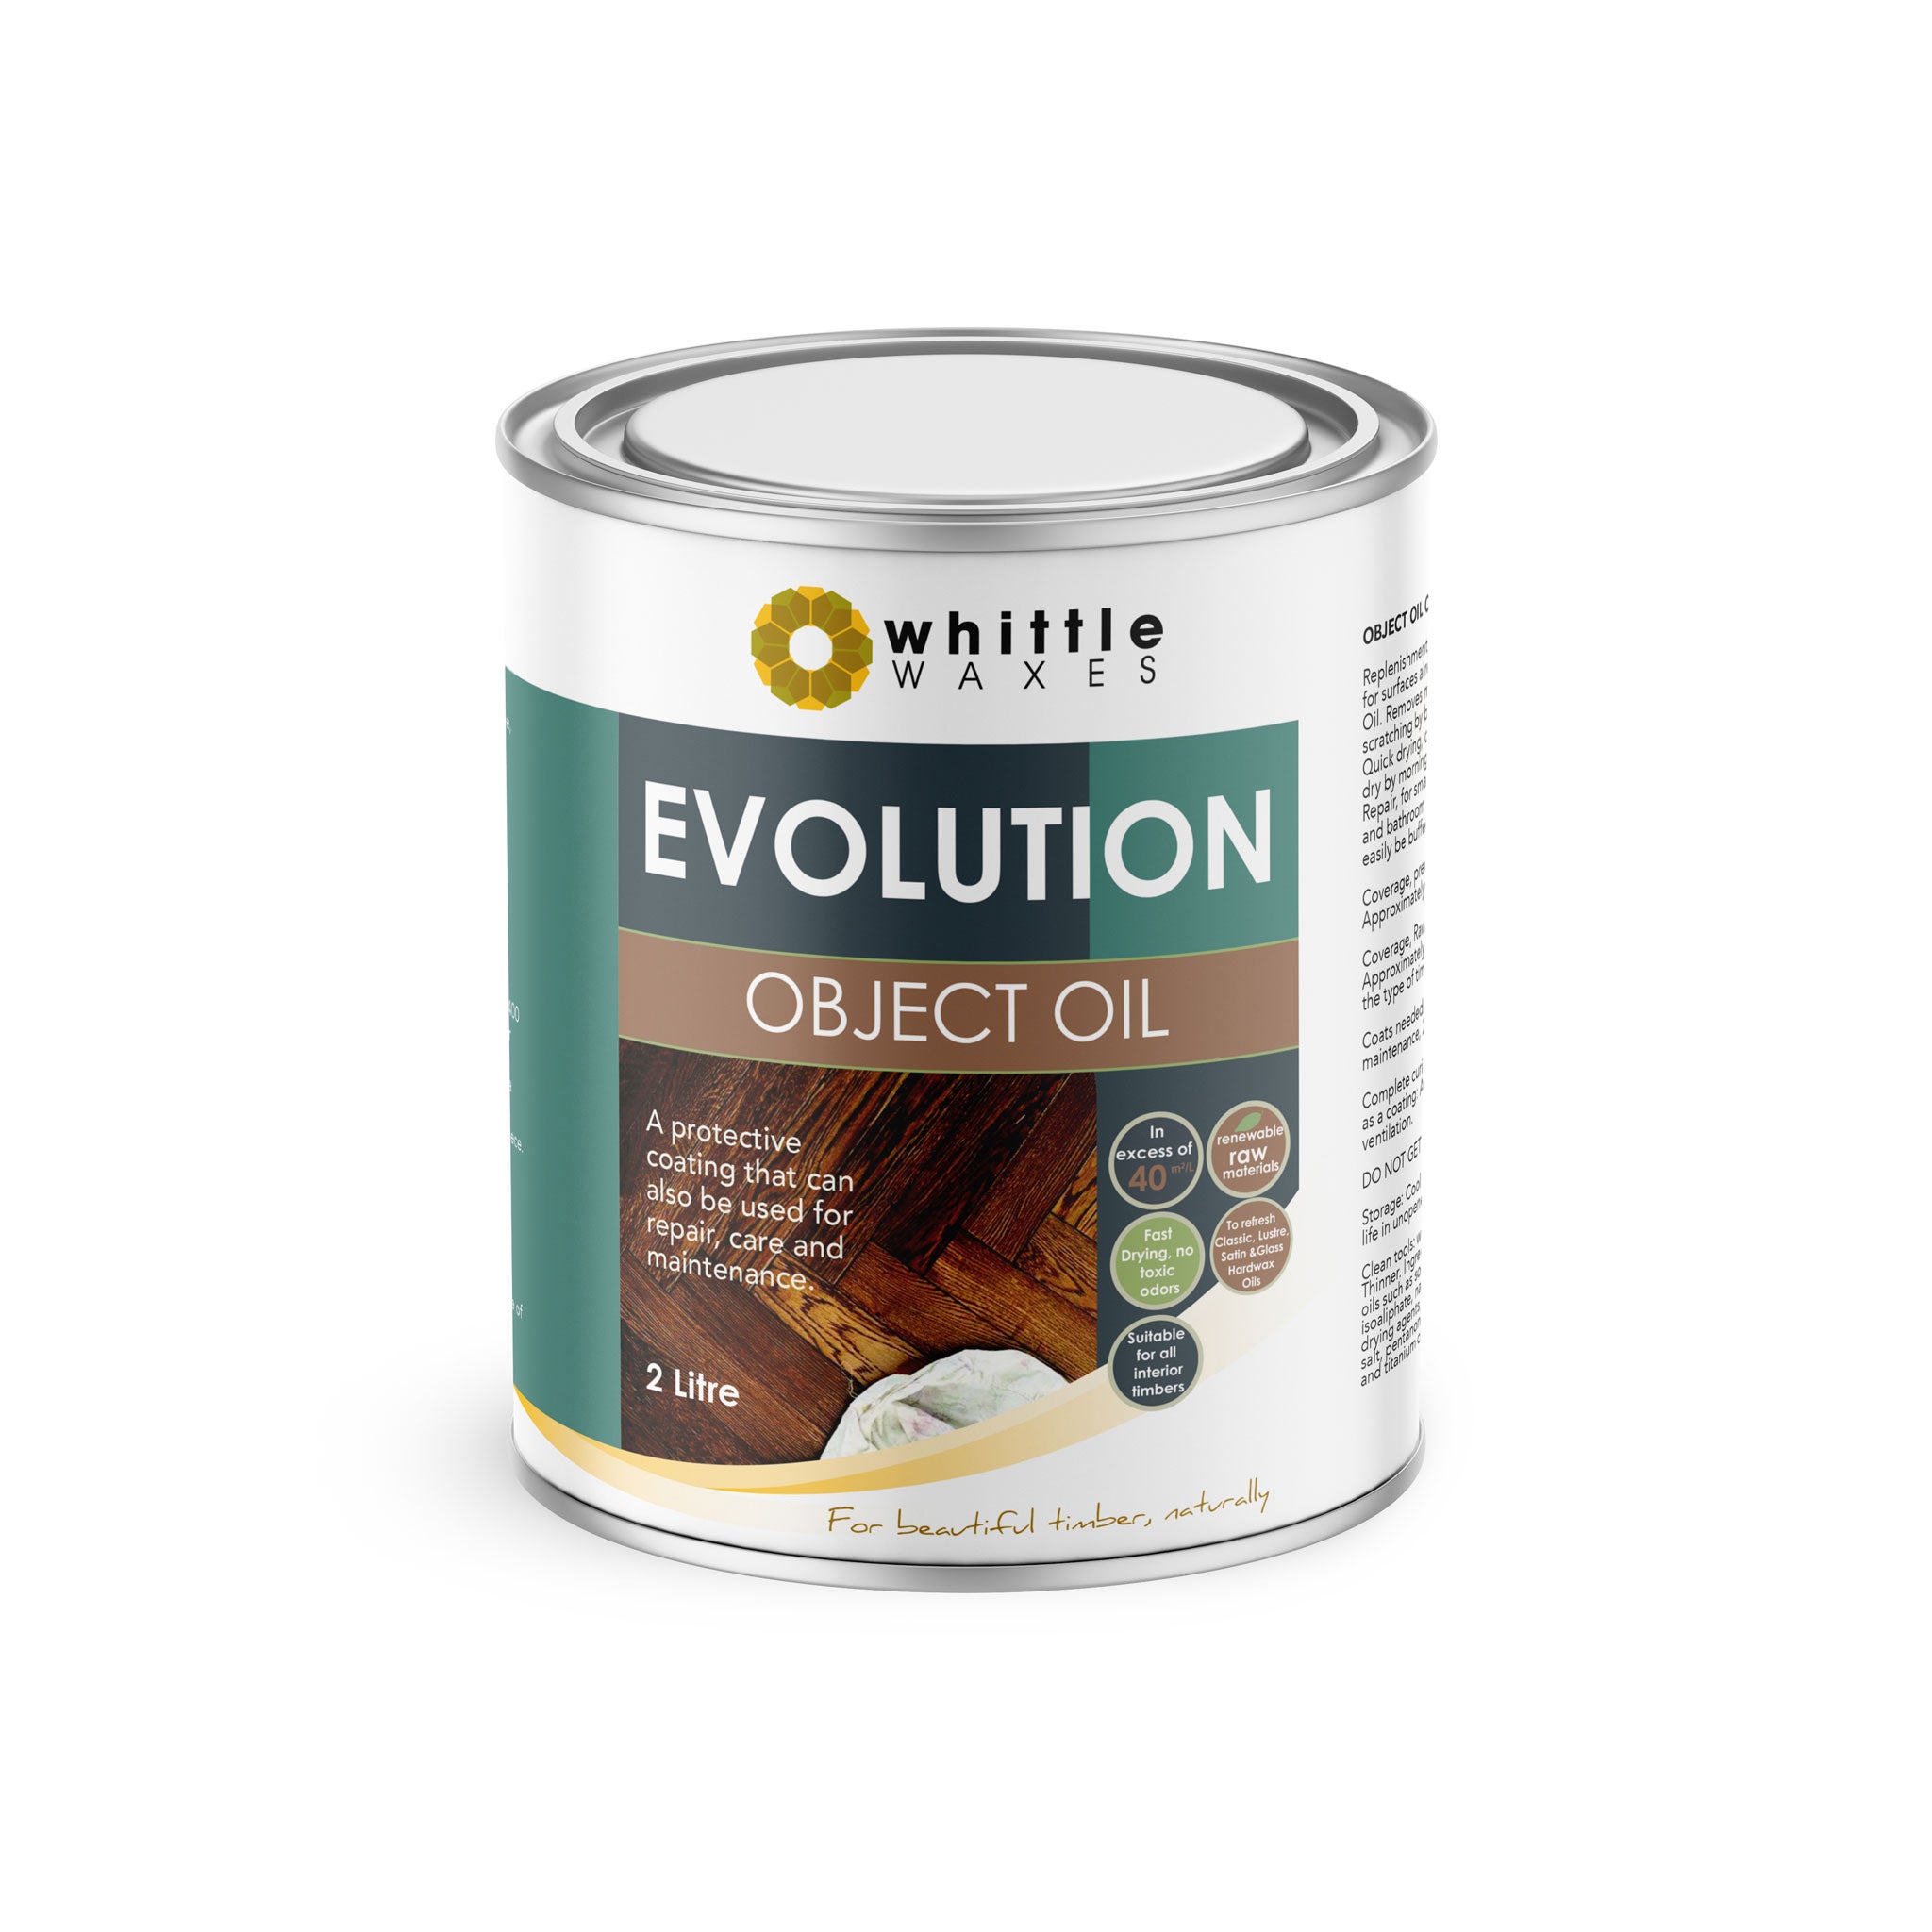 Whittle Waxes Evolution Object Oil - ideal for repair and replenishment - 2 Litre